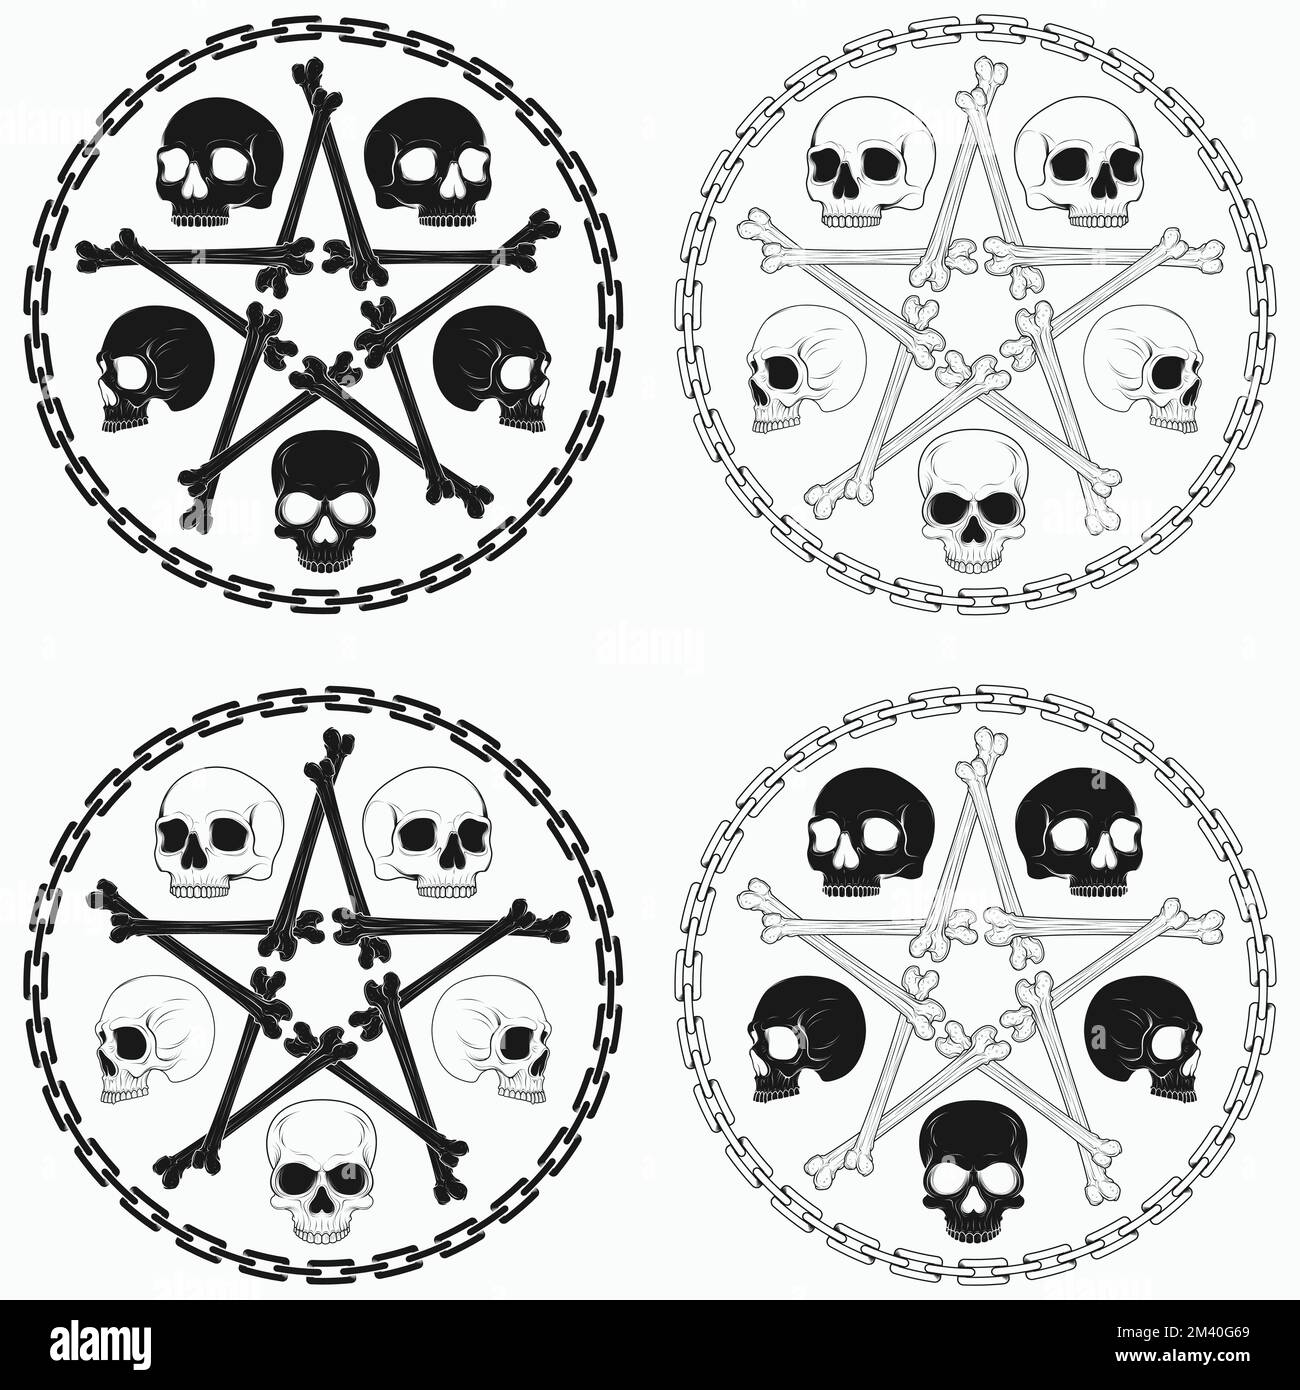 Vector illustration of skulls with bone stara surrounded by a chain circle, in grayscale Stock Vector